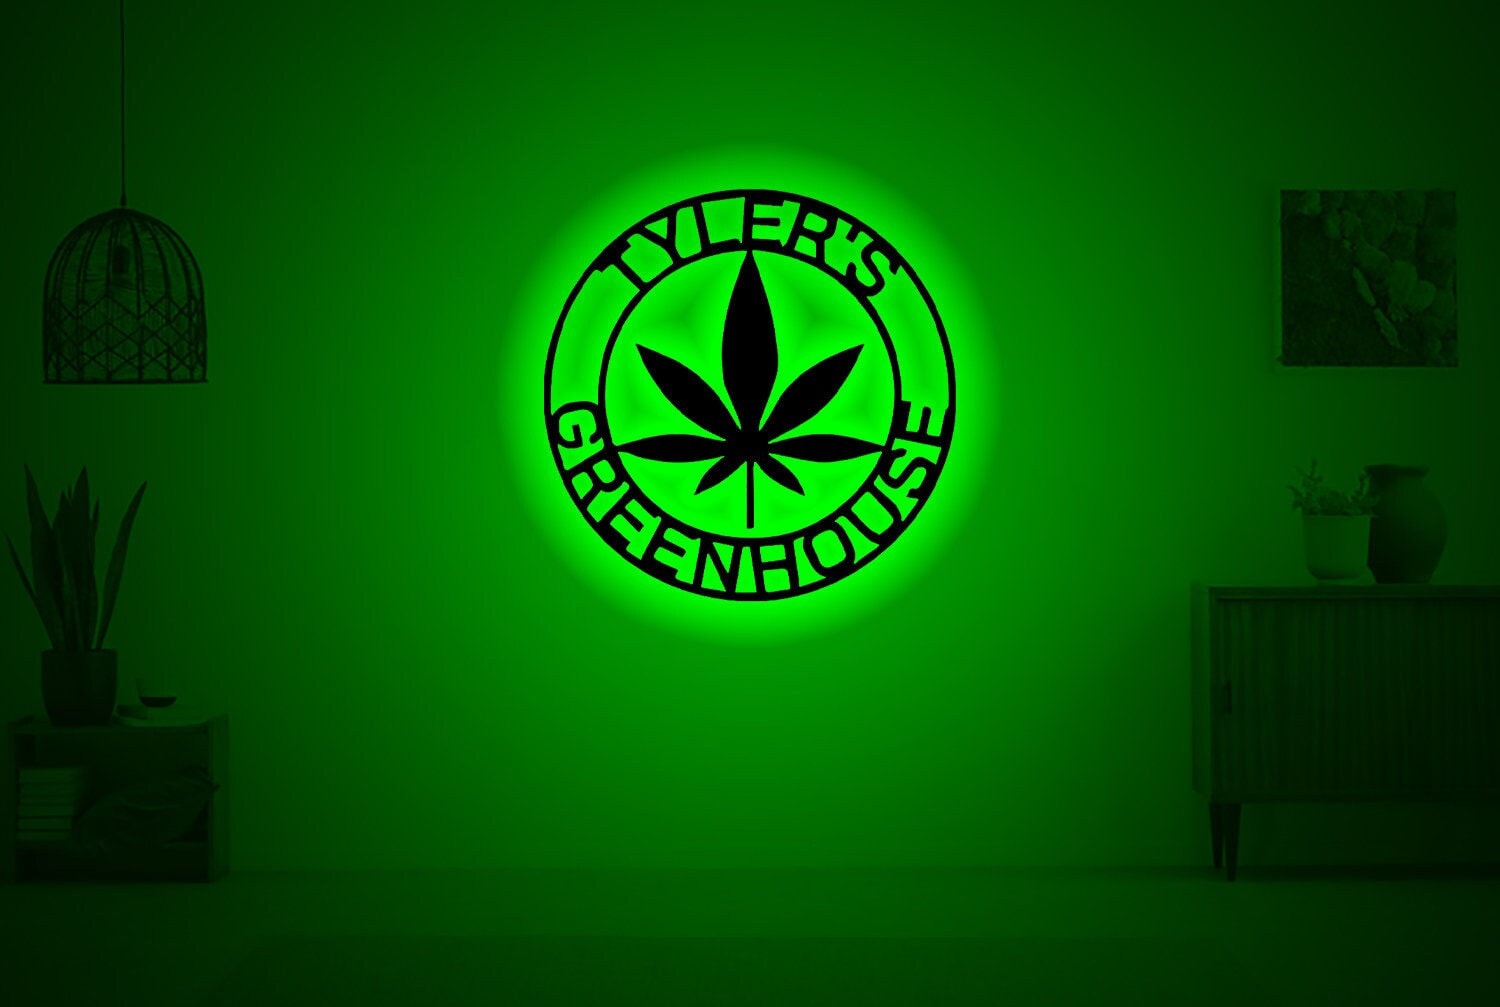 Dispensary Sign Decor Home or Store Wall Sign 7 X 7 Inches 